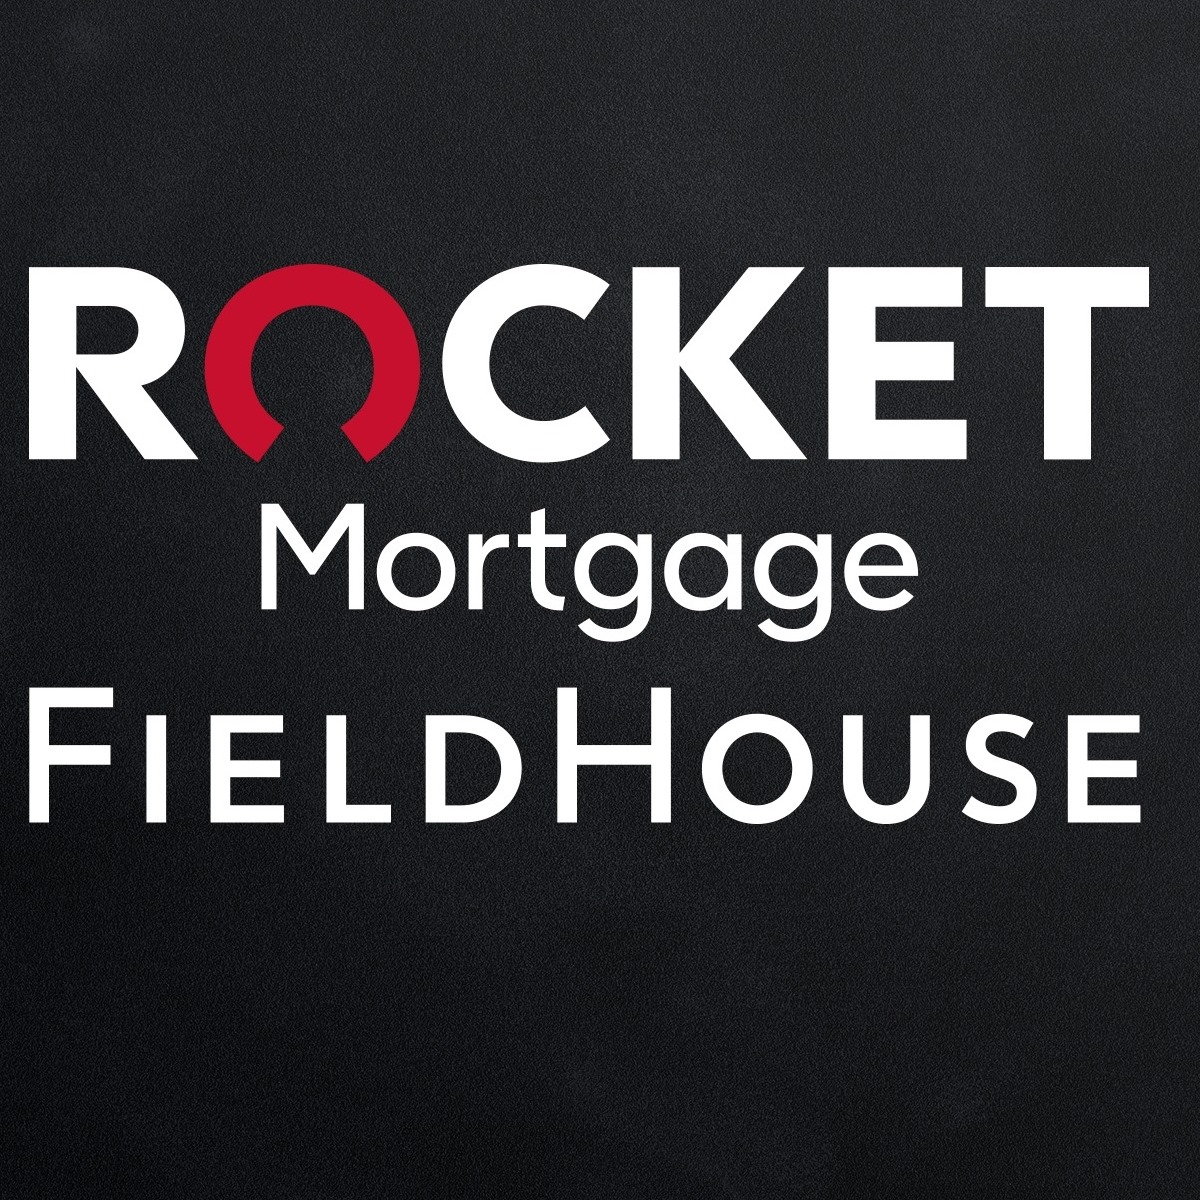 Rocket Mortgage Field House on Black Background